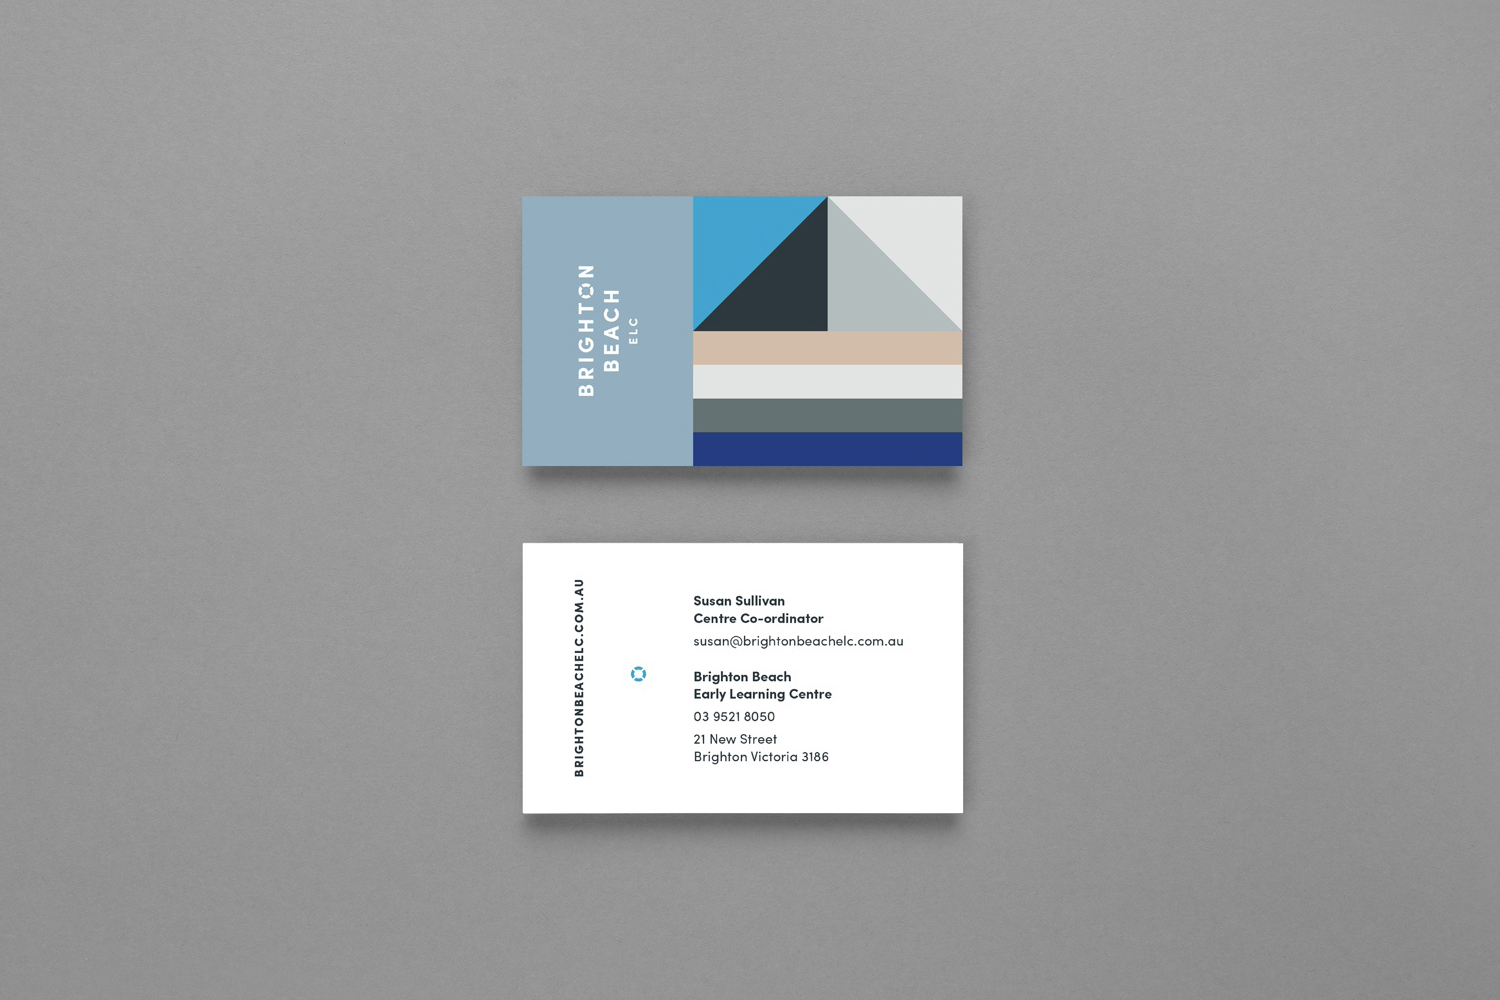 Visual identity and business cards designed by Studio Brave for Brighton & Brighton Beach early learning centres.